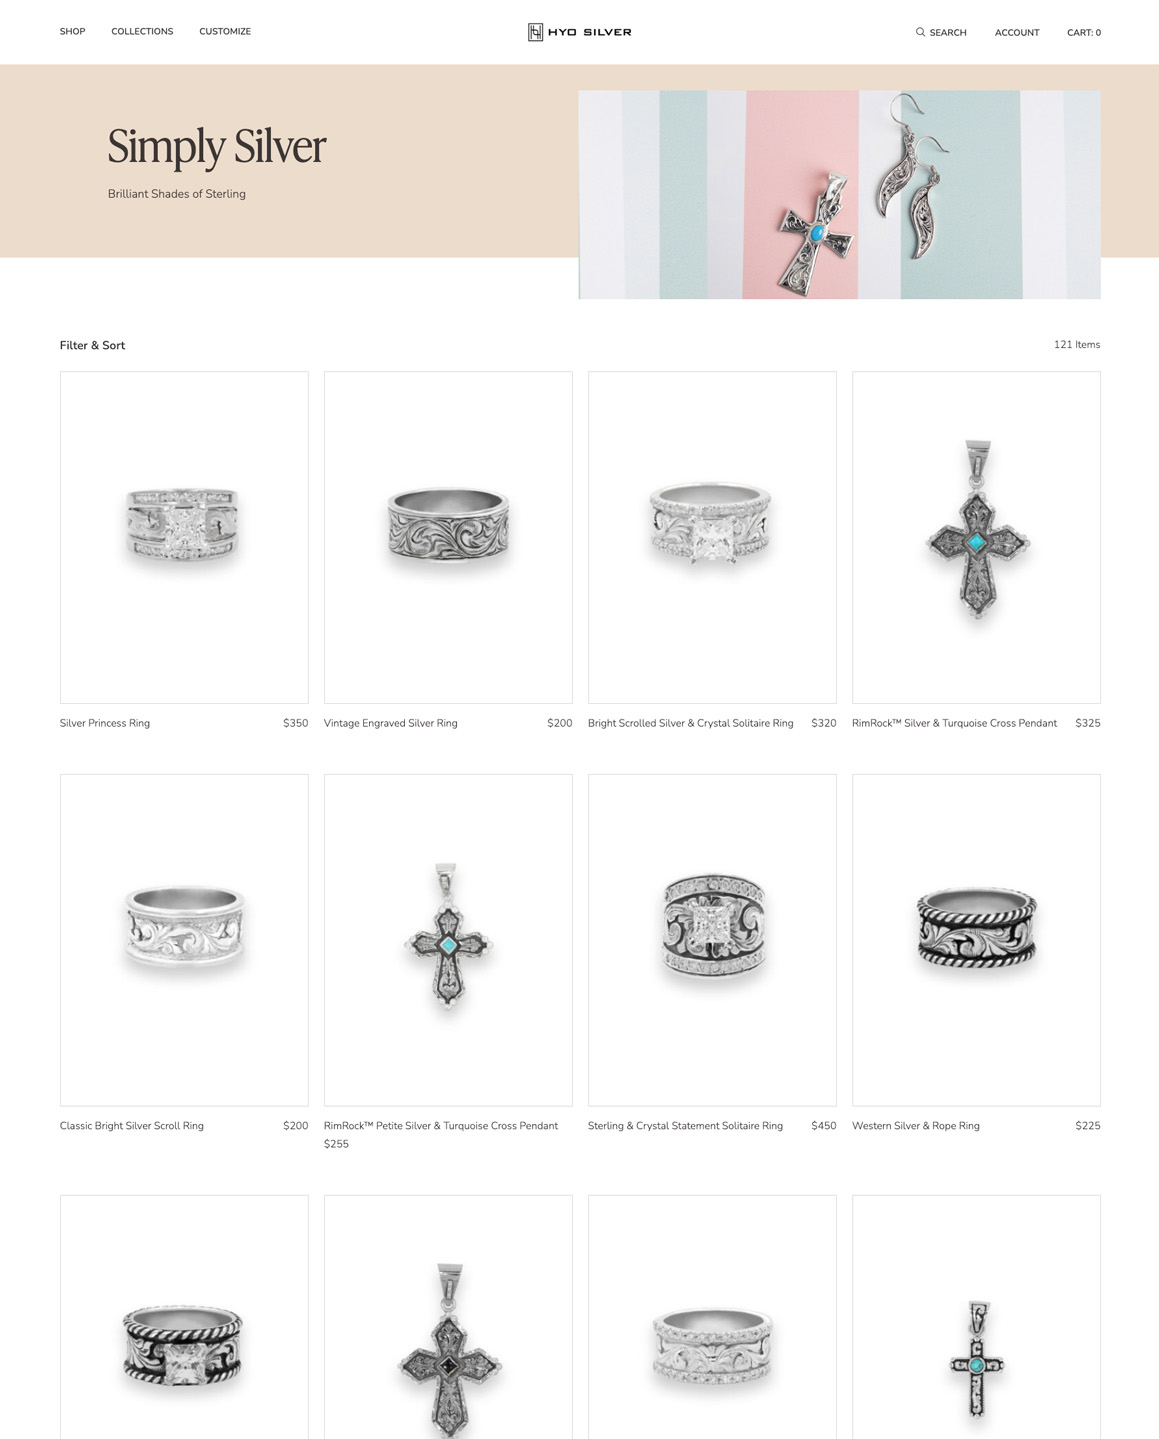 Hyo Silver Product Category Design